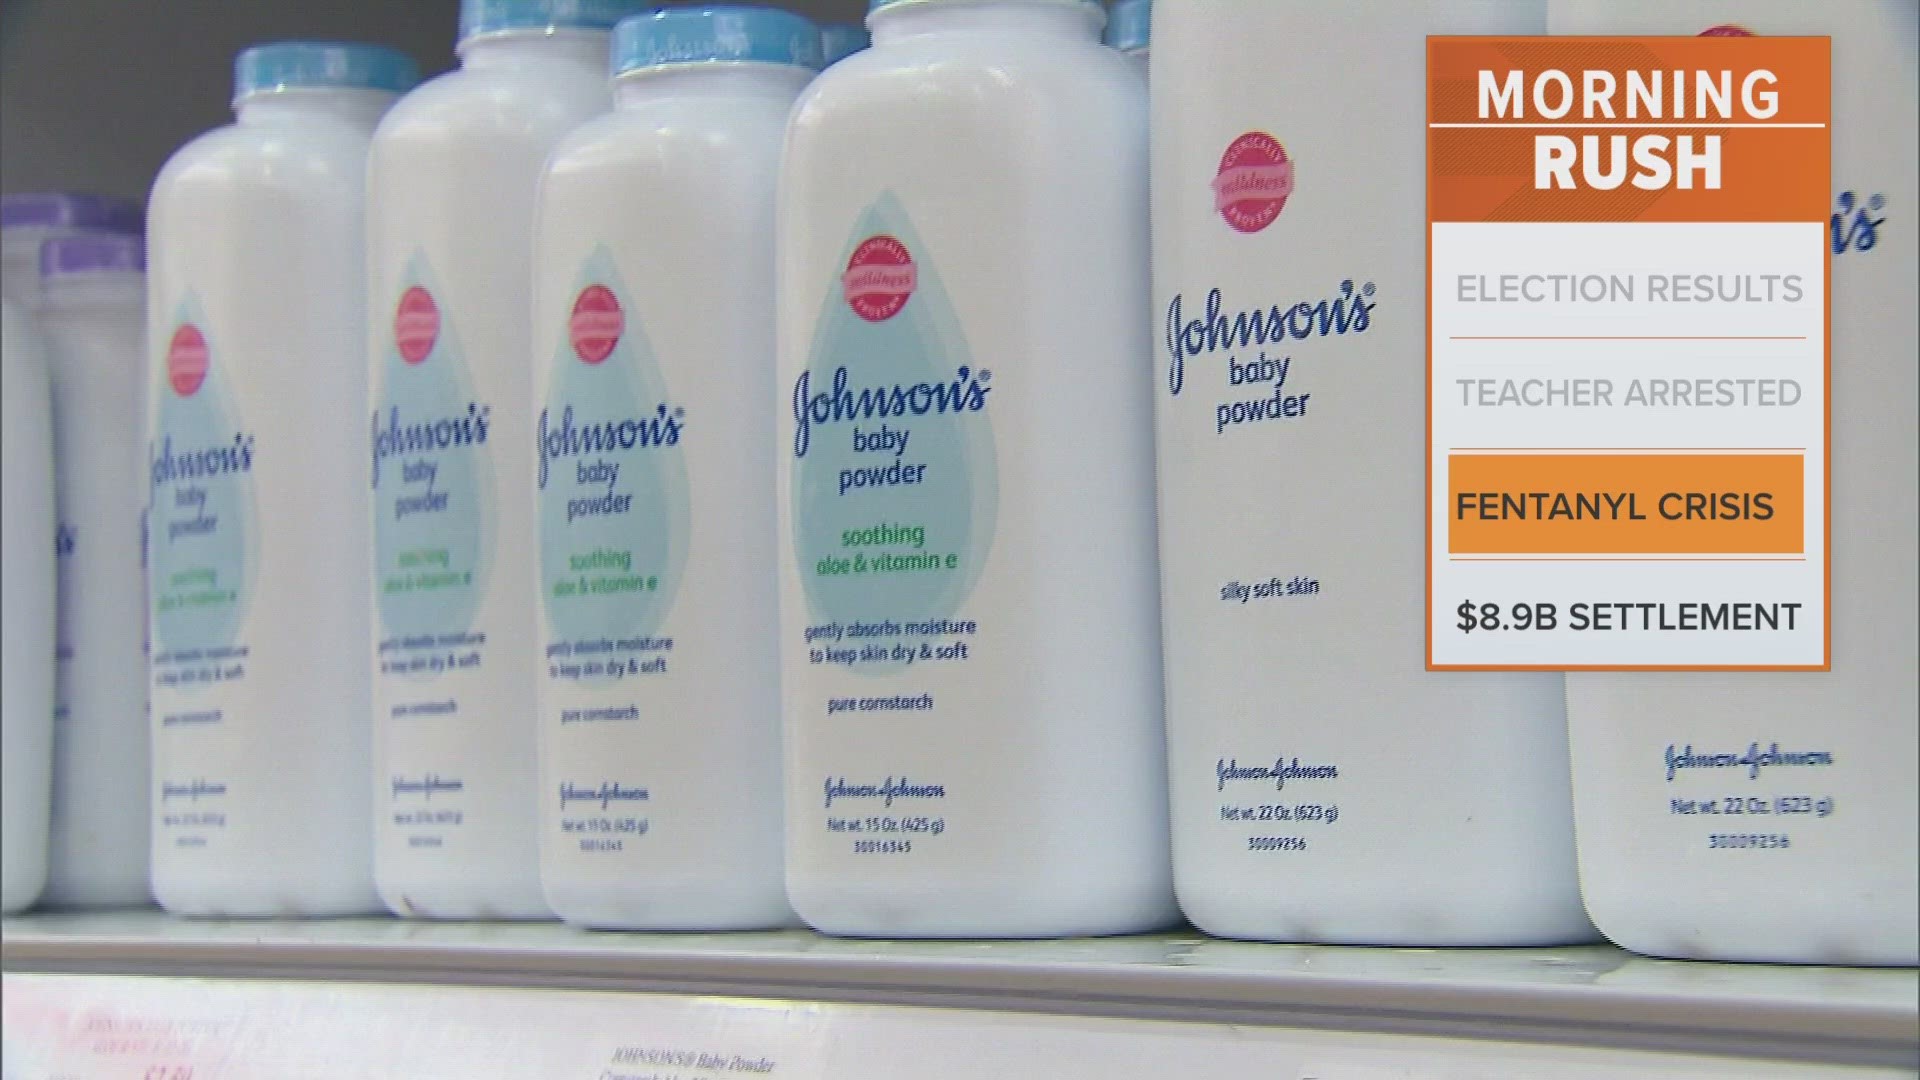 The lawsuits filed against Johnson & Johnson had alleged its baby powder containing talc caused users to develop ovarian cancer and mesothelioma.